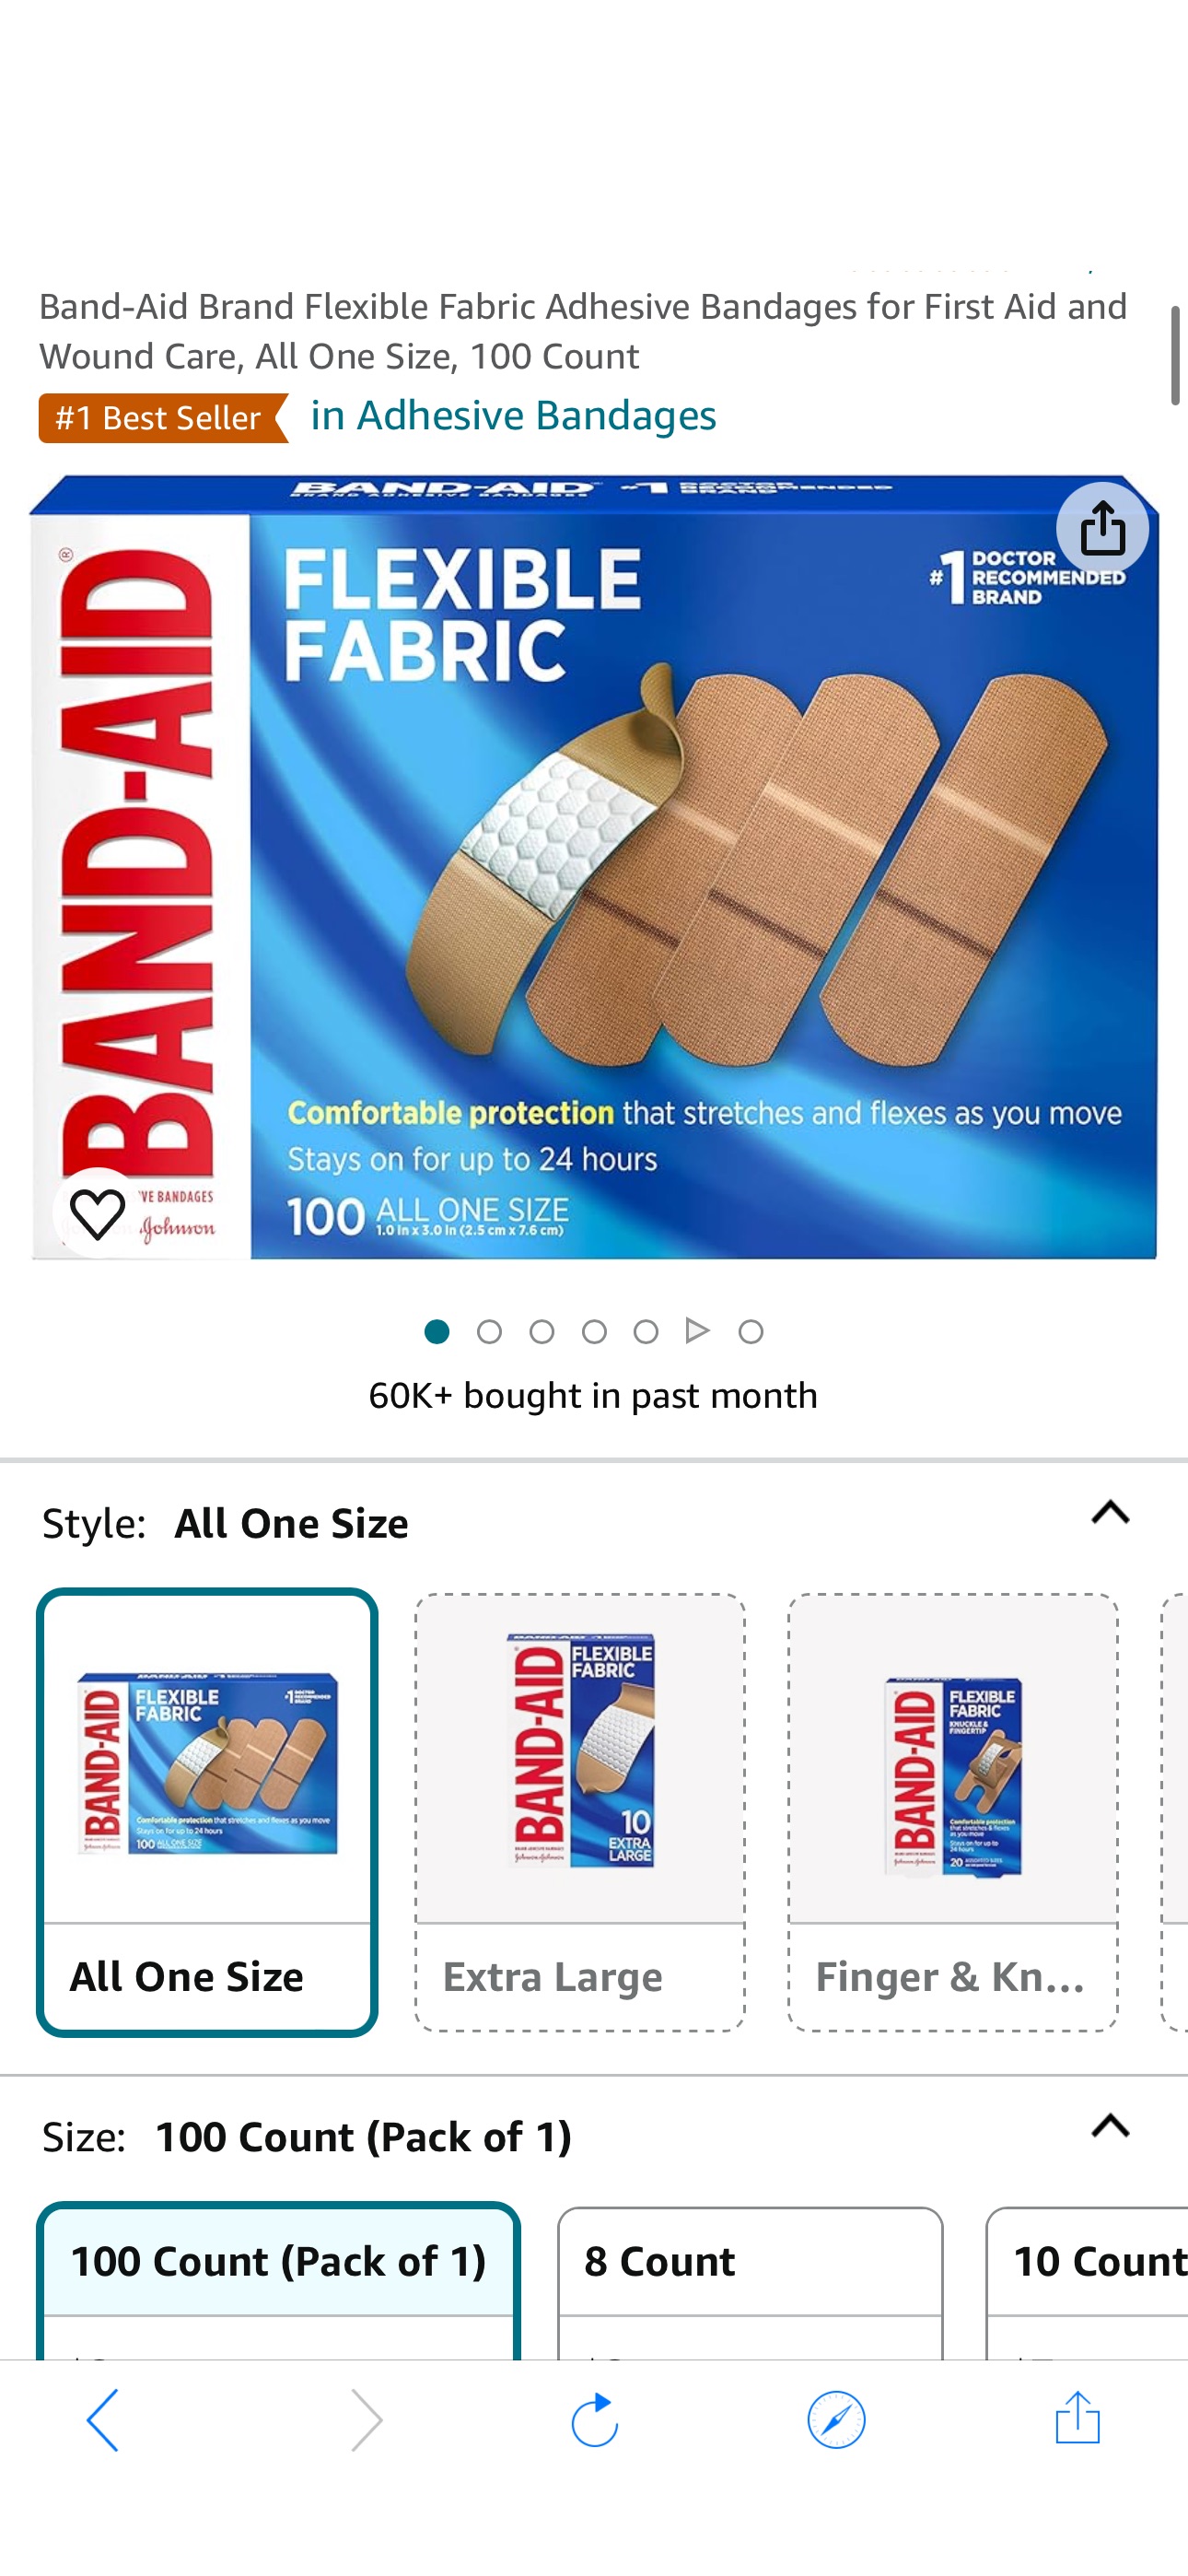 Amazon.com: Band-Aid Brand Flexible Fabric Adhesive Bandages for Wound Care and First Aid, All One Size, 100 Count : Health & Household省20%off